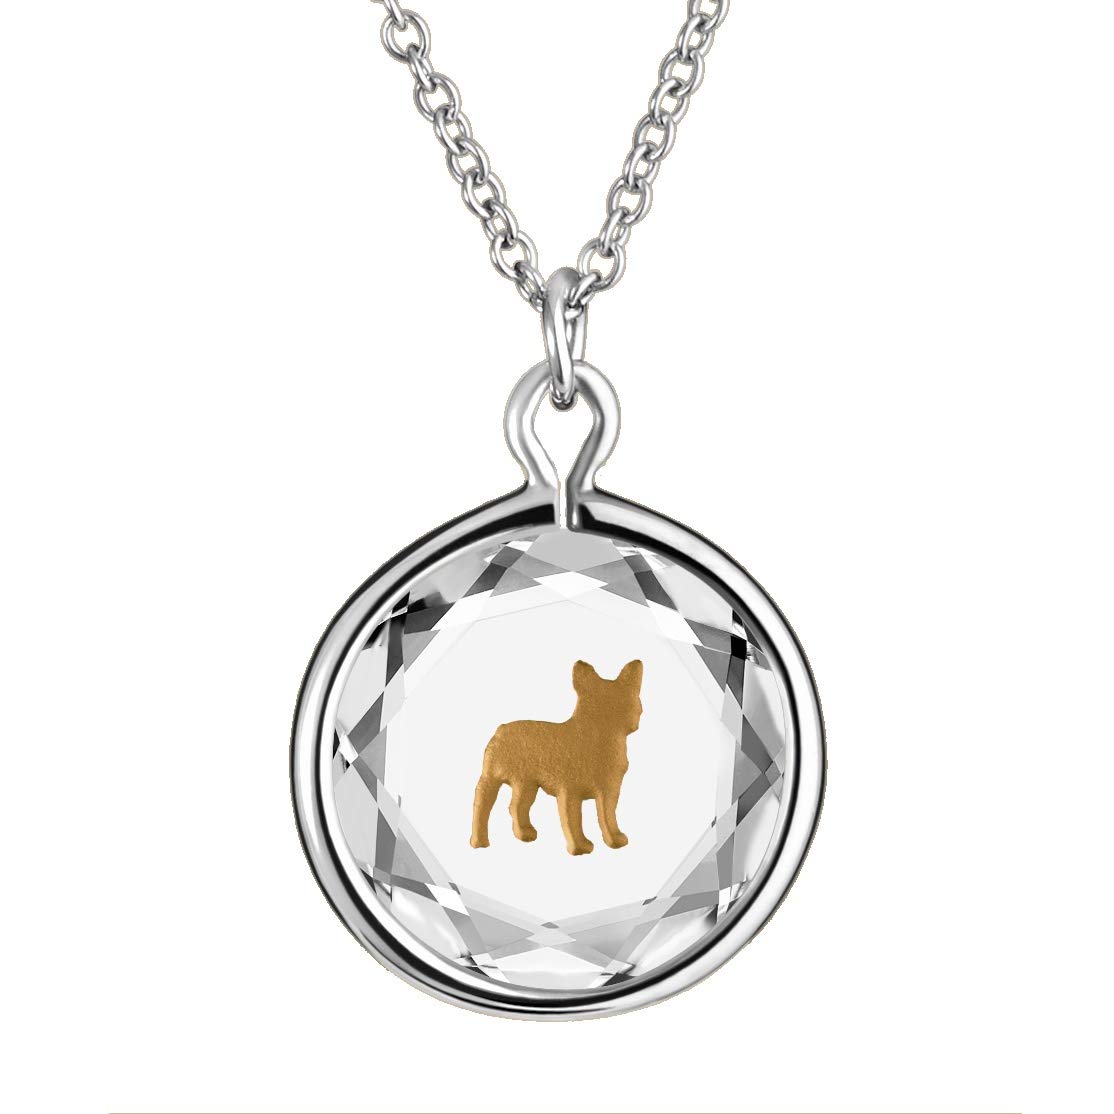 LovePendants Engraved and Enameled Swarovski Crsytal French Bulldog Pendant/Necklace in Sterling Silver